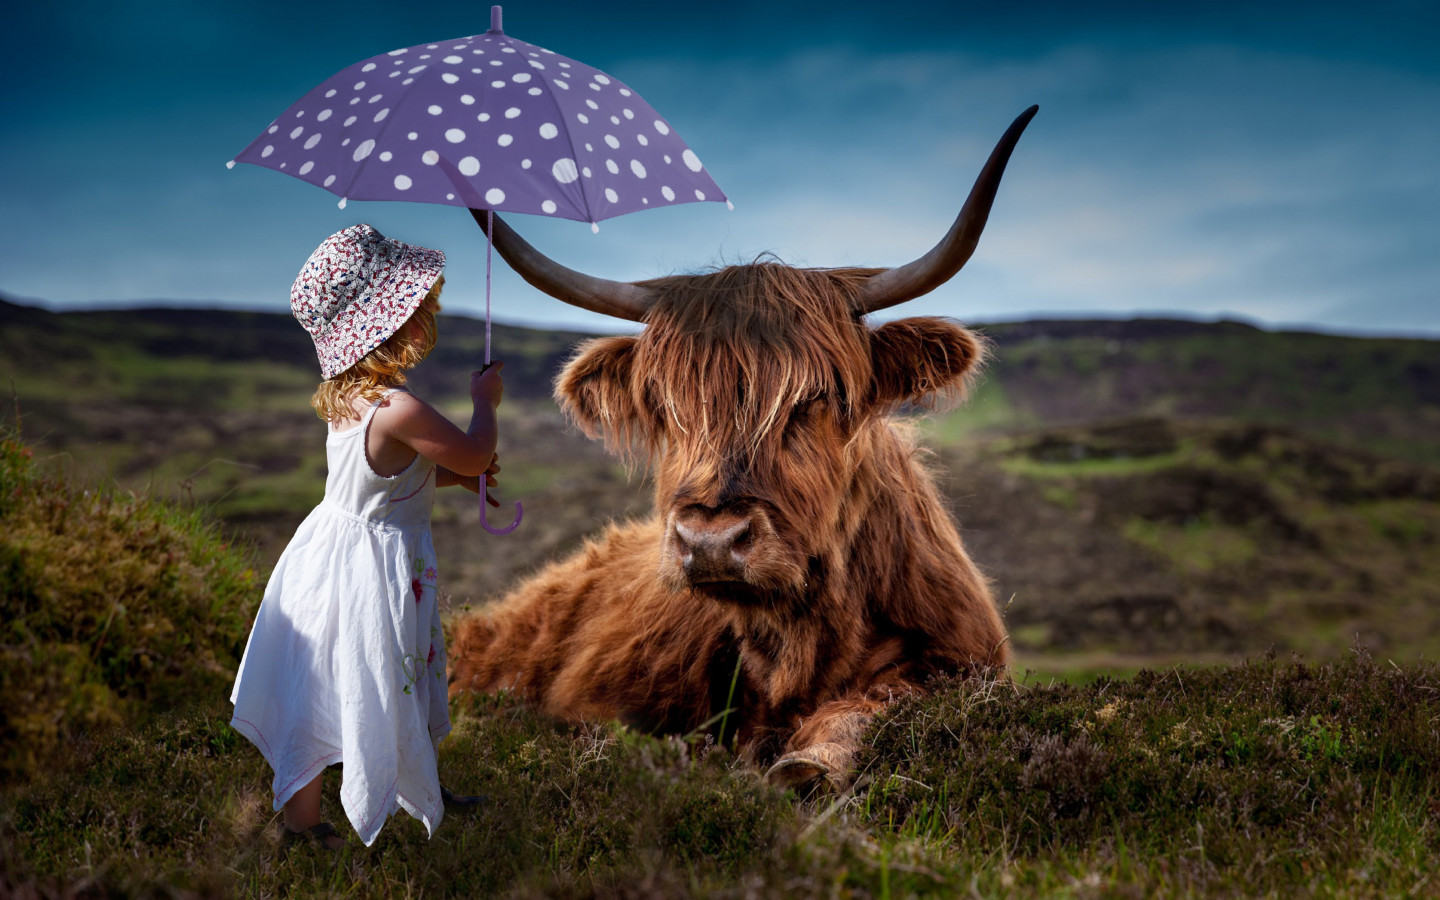 Child with the umbrella and the funny cow wallpaper 1440x900